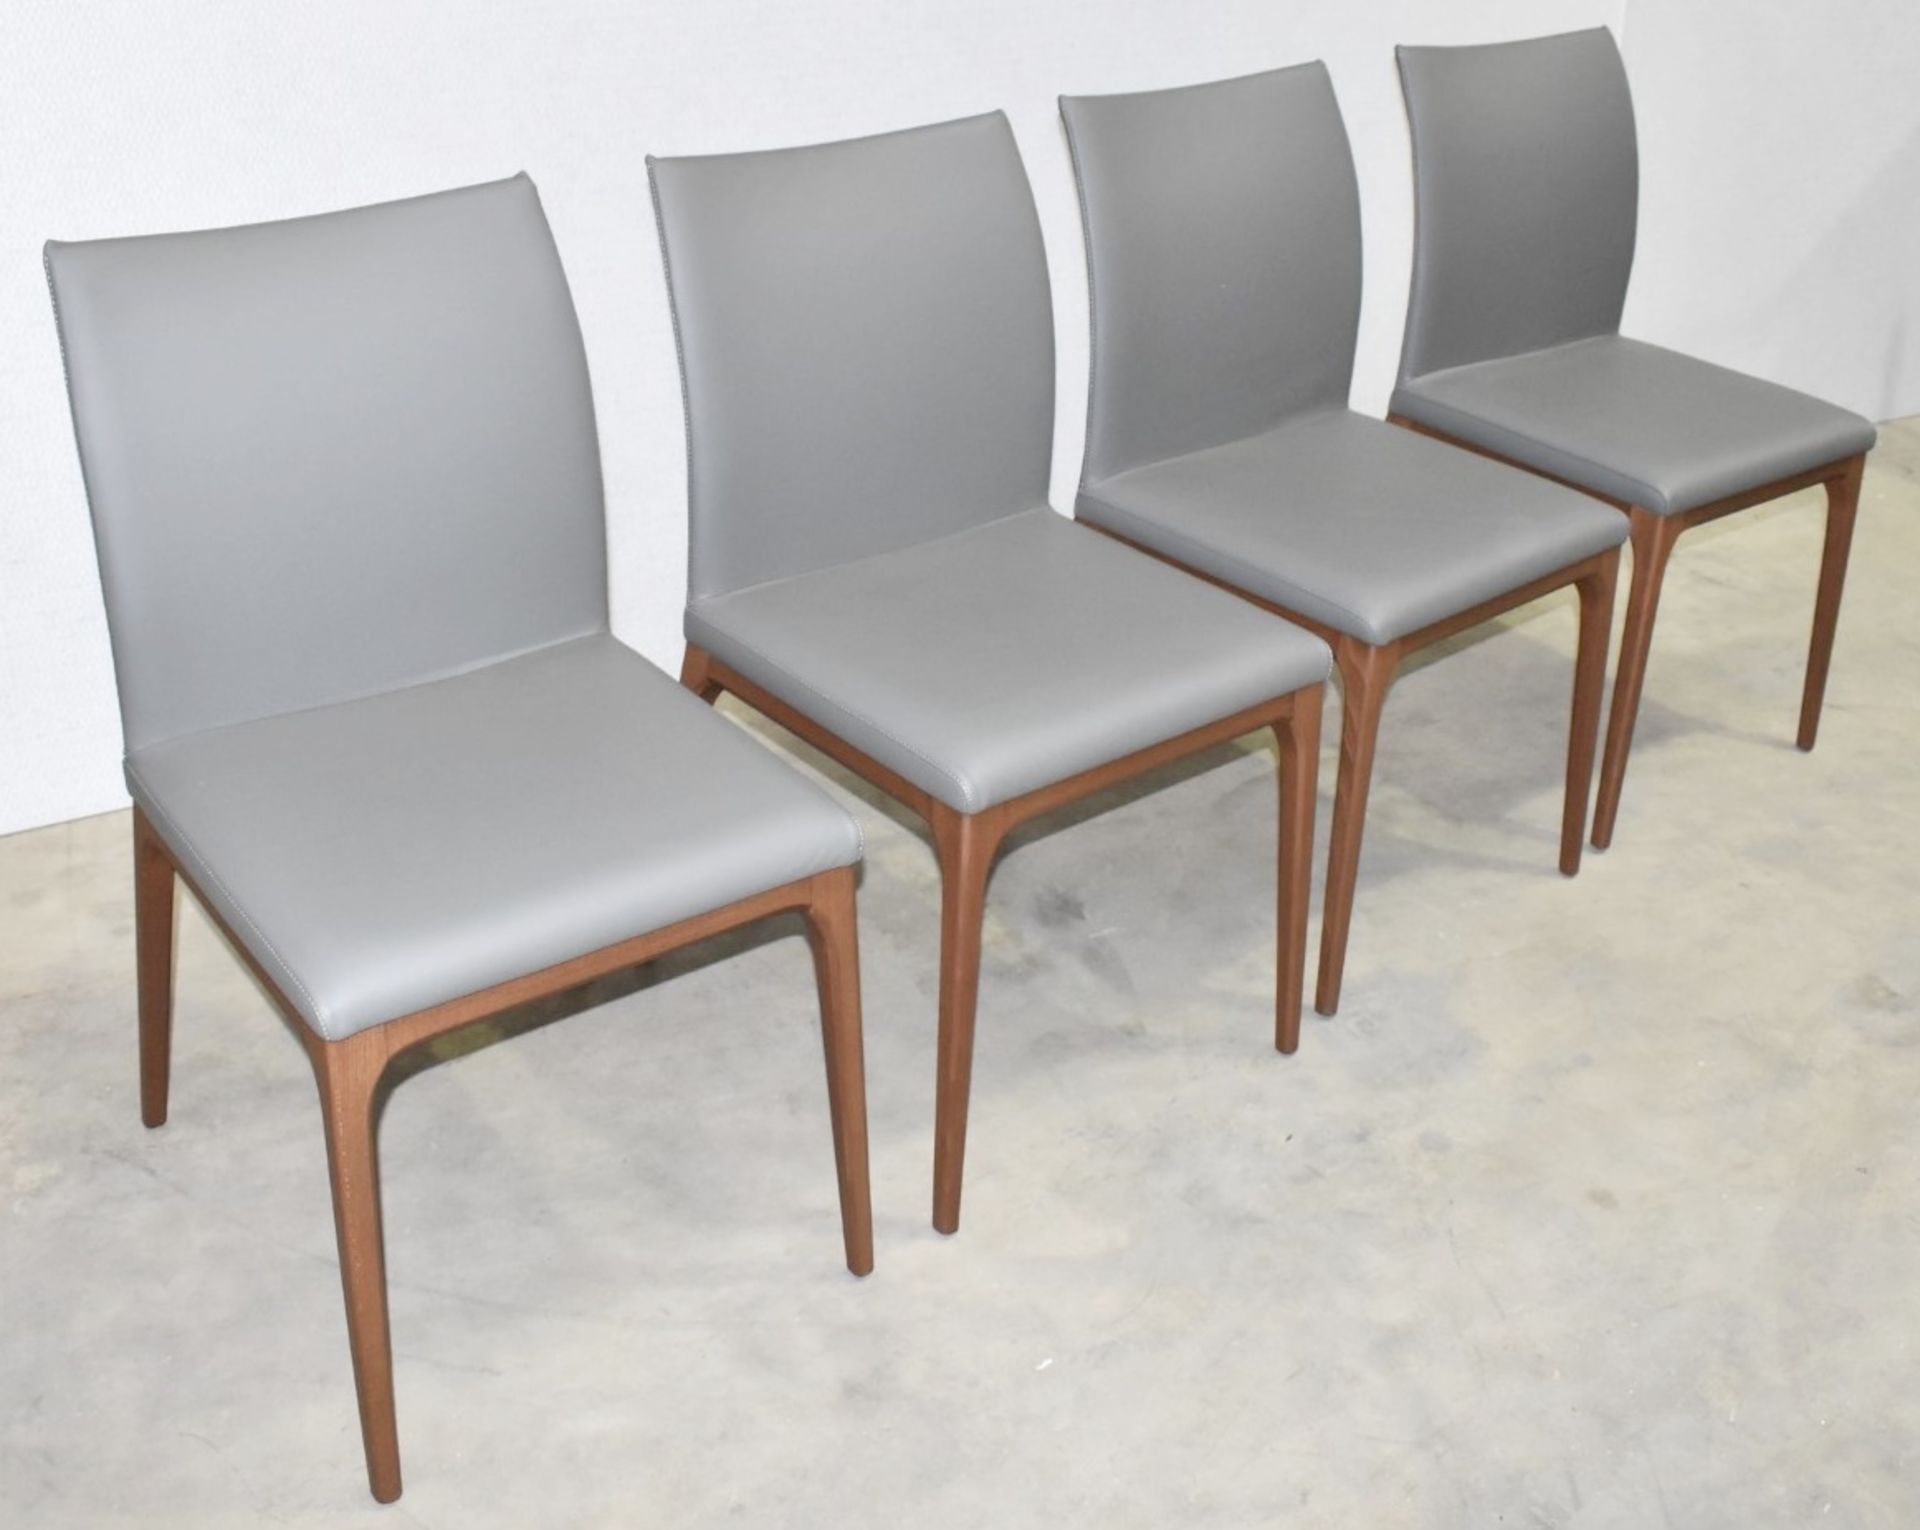 4 x CATTELAN ITALIA 'Arcadia Couture' Leather Upholstered Dining Chairs - Total Original RRP £3,540 - Image 13 of 19